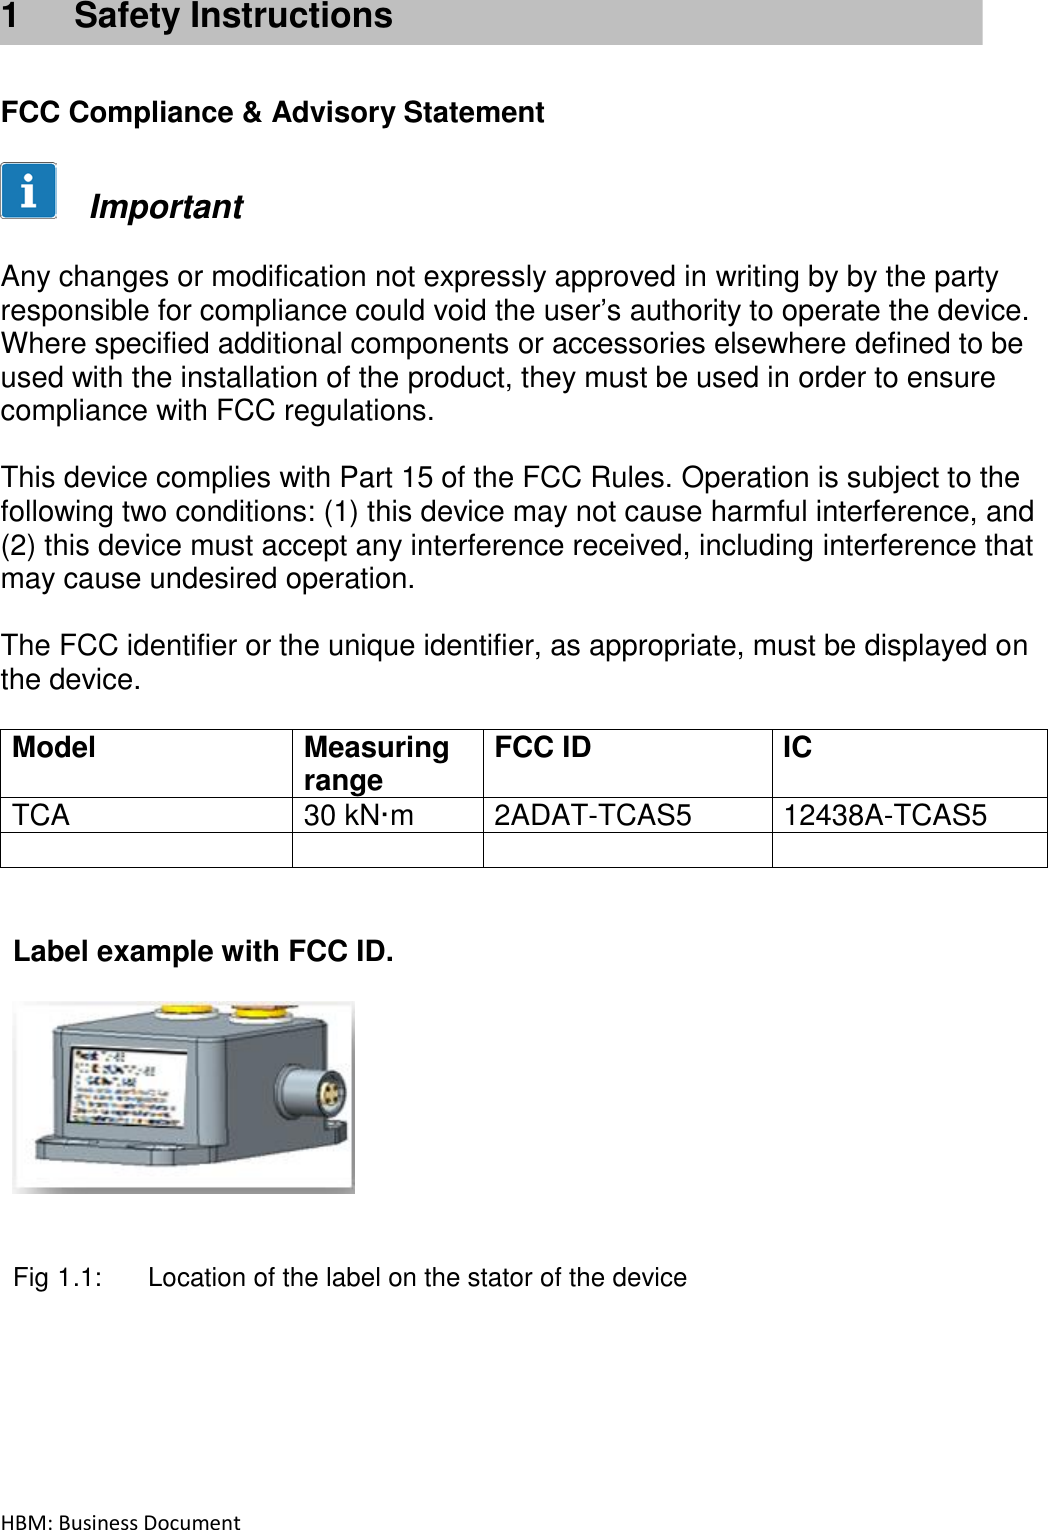 HBM: Business Document   1  Safety Instructions    FCC Compliance &amp; Advisory Statement        Important   Any changes or modification not expressly approved in writing by by the party responsible for compliance could void the user’s authority to operate the device. Where specified additional components or accessories elsewhere defined to be used with the installation of the product, they must be used in order to ensure compliance with FCC regulations.   This device complies with Part 15 of the FCC Rules. Operation is subject to the following two conditions: (1) this device may not cause harmful interference, and (2) this device must accept any interference received, including interference that may cause undesired operation.  The FCC identifier or the unique identifier, as appropriate, must be displayed on the device.  Model Measuring range FCC ID IC TCA 30 kN·m 2ADAT-TCAS5 12438A-TCAS5       Label example with FCC ID.     Fig 1.1:  Location of the label on the stator of the device    